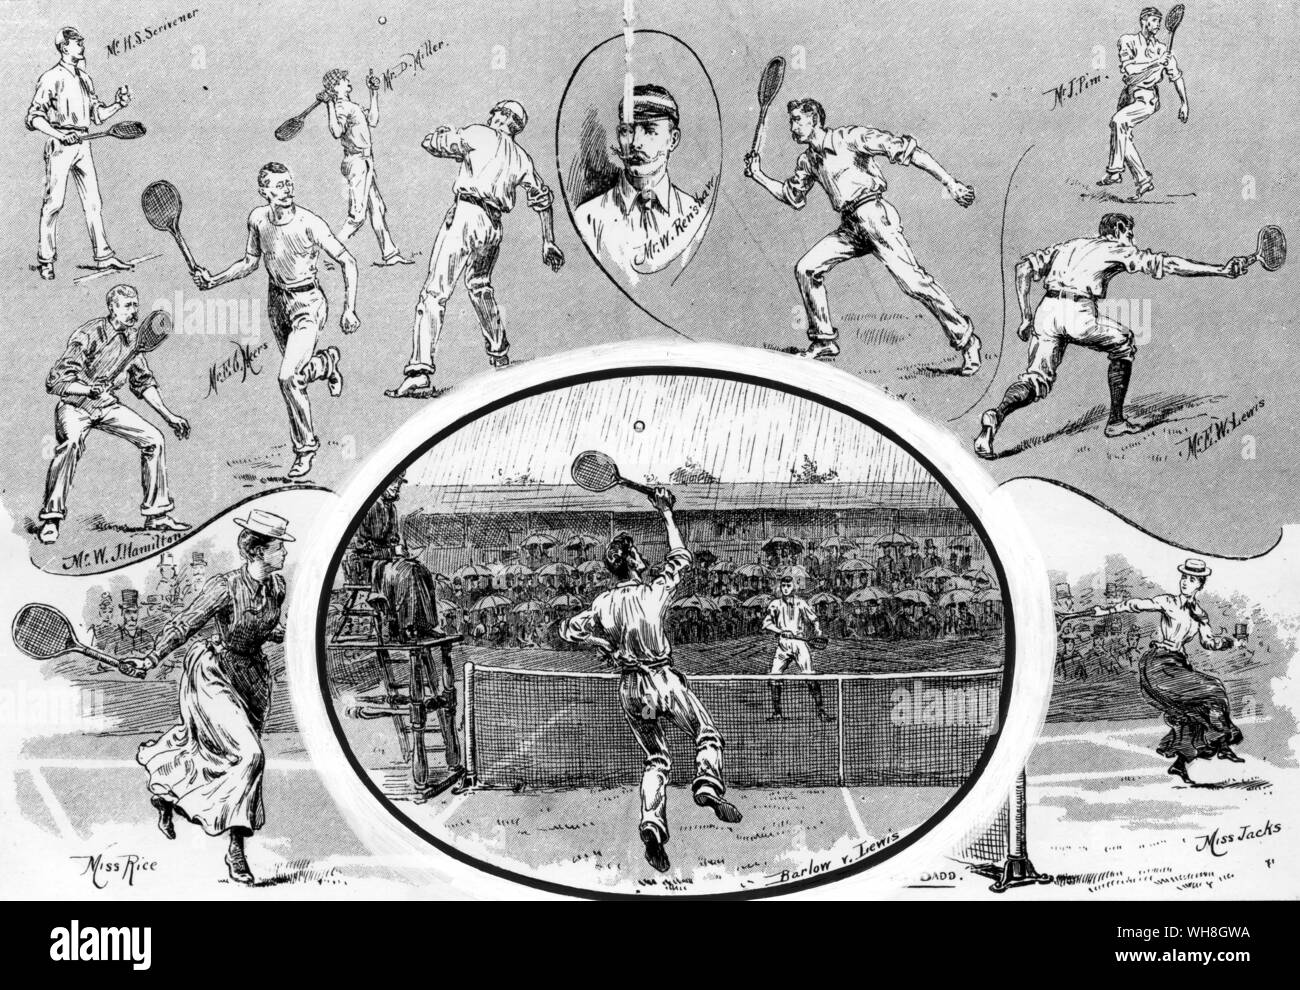 Lawn Tennis Championships at Wimbledon. The semi-final between H S Barlow and E W Lewis in  July 1890. The Encyclopedia of Tennis page 89. Stock Photo